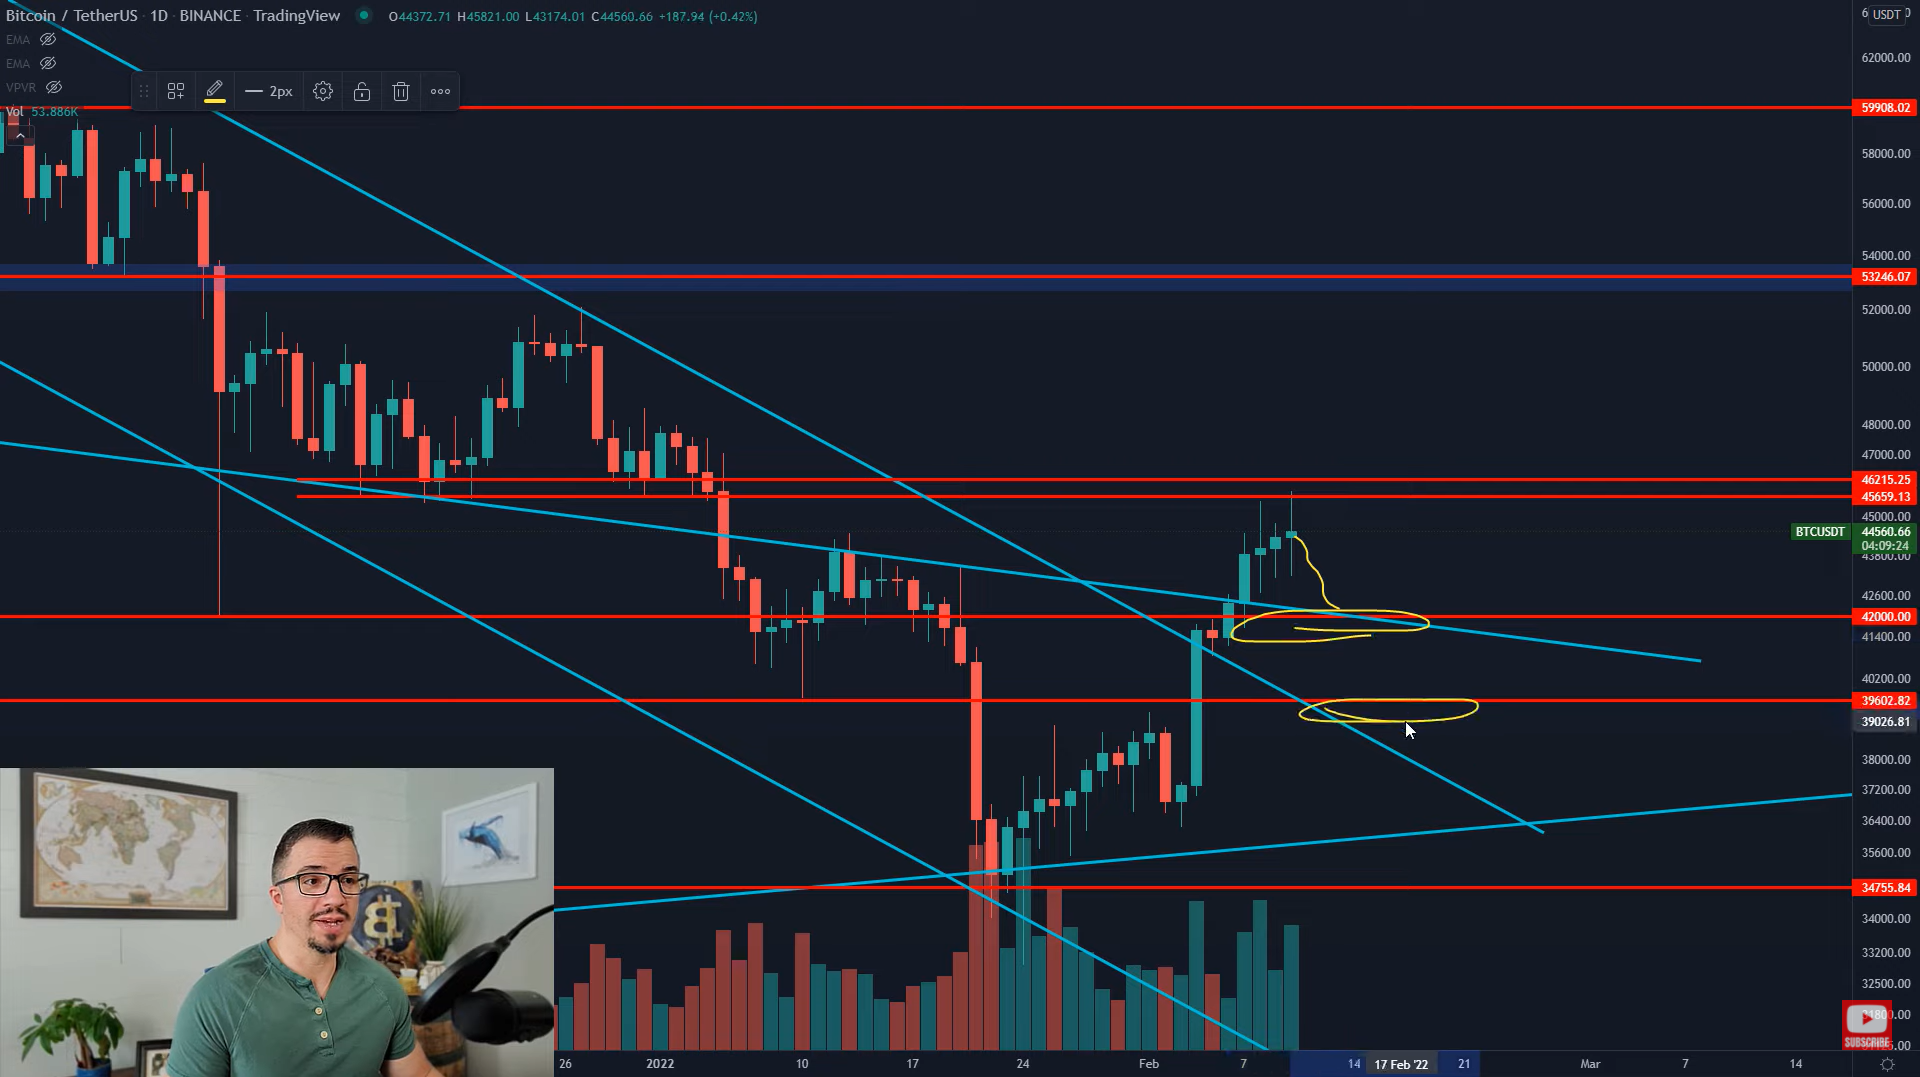 These are the key levels to watch for in BTC